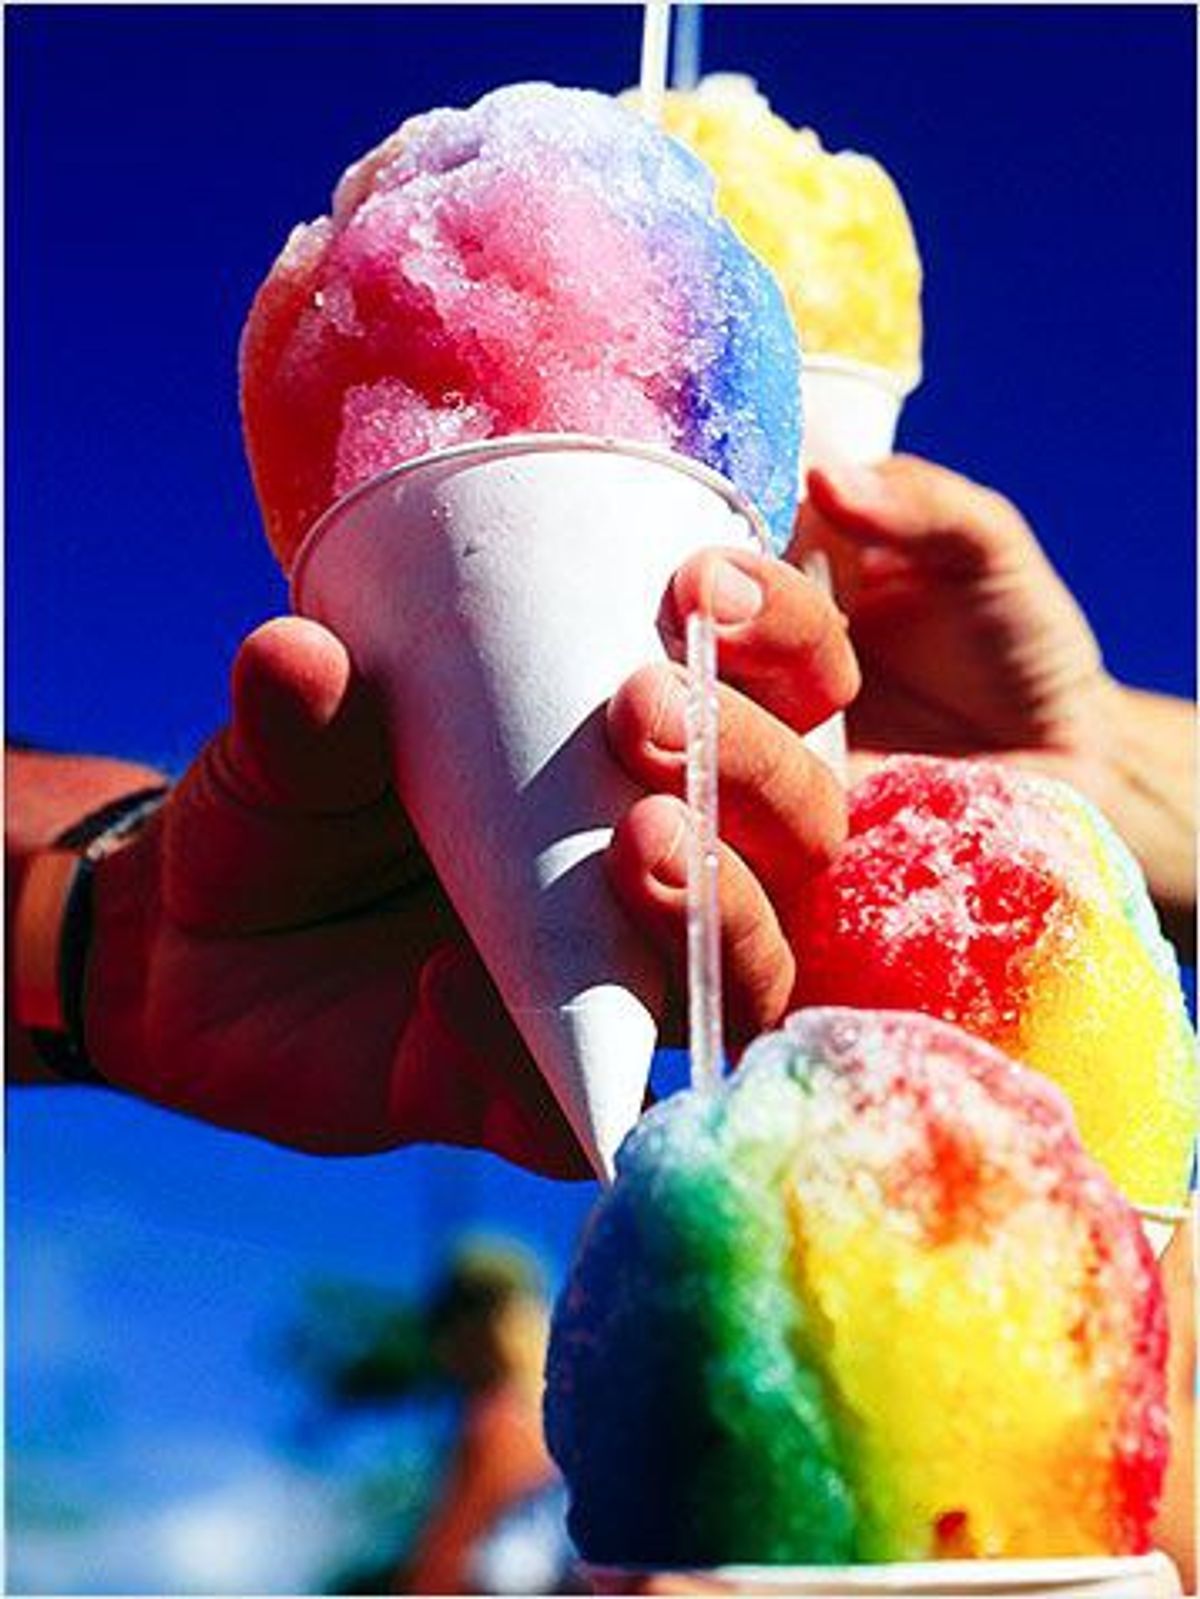 Why Snow Cones Are Hands Down The Best Summertime Treat